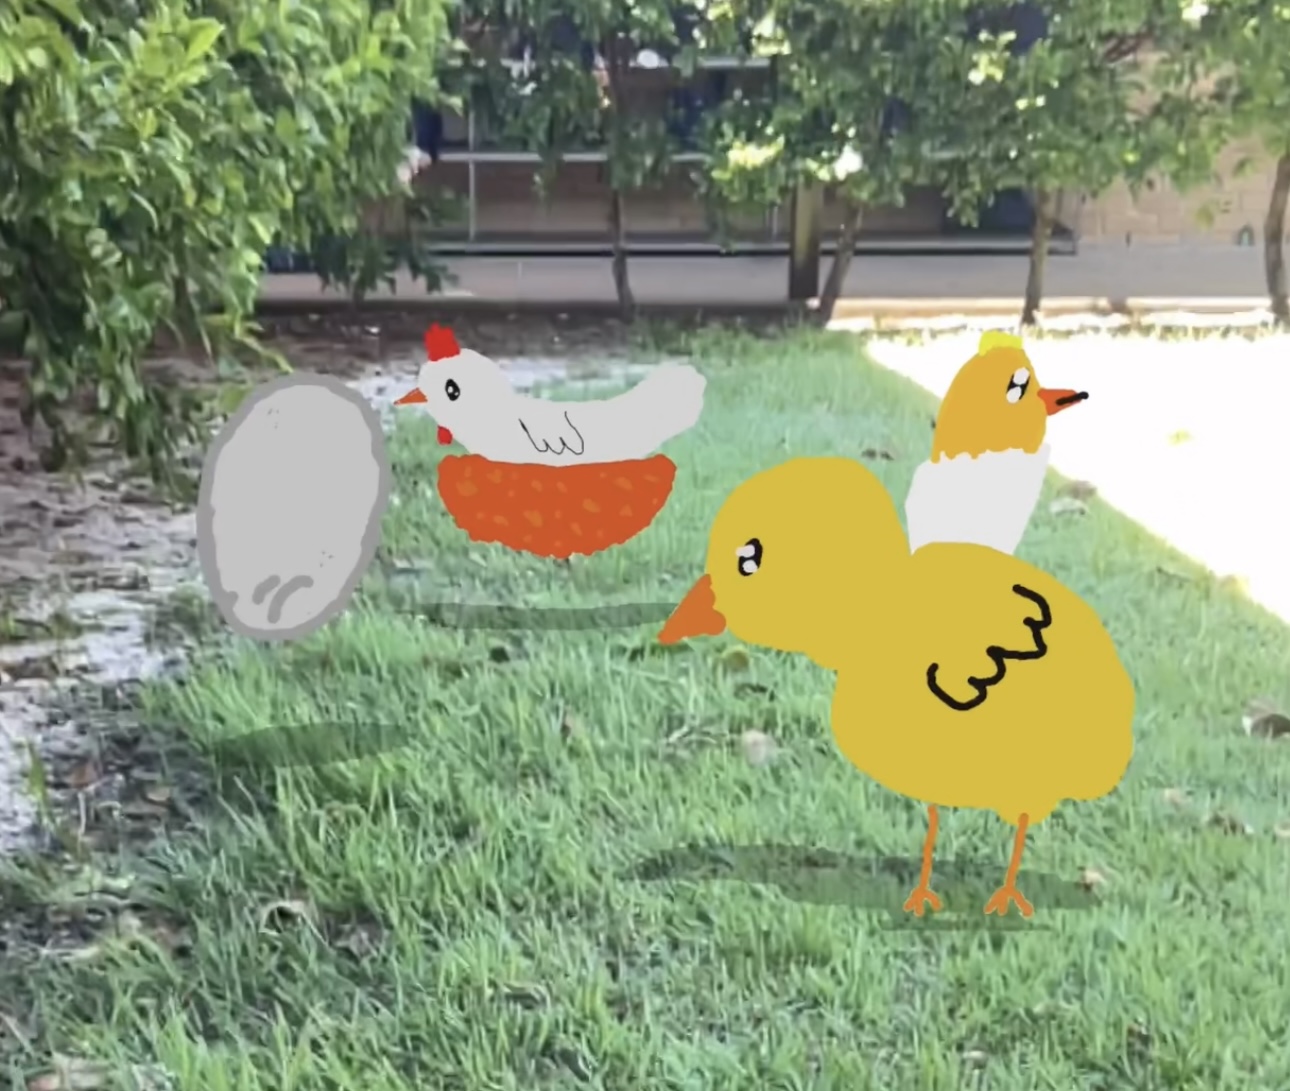 Lifecycle of a Chicken using Augmented Reality 